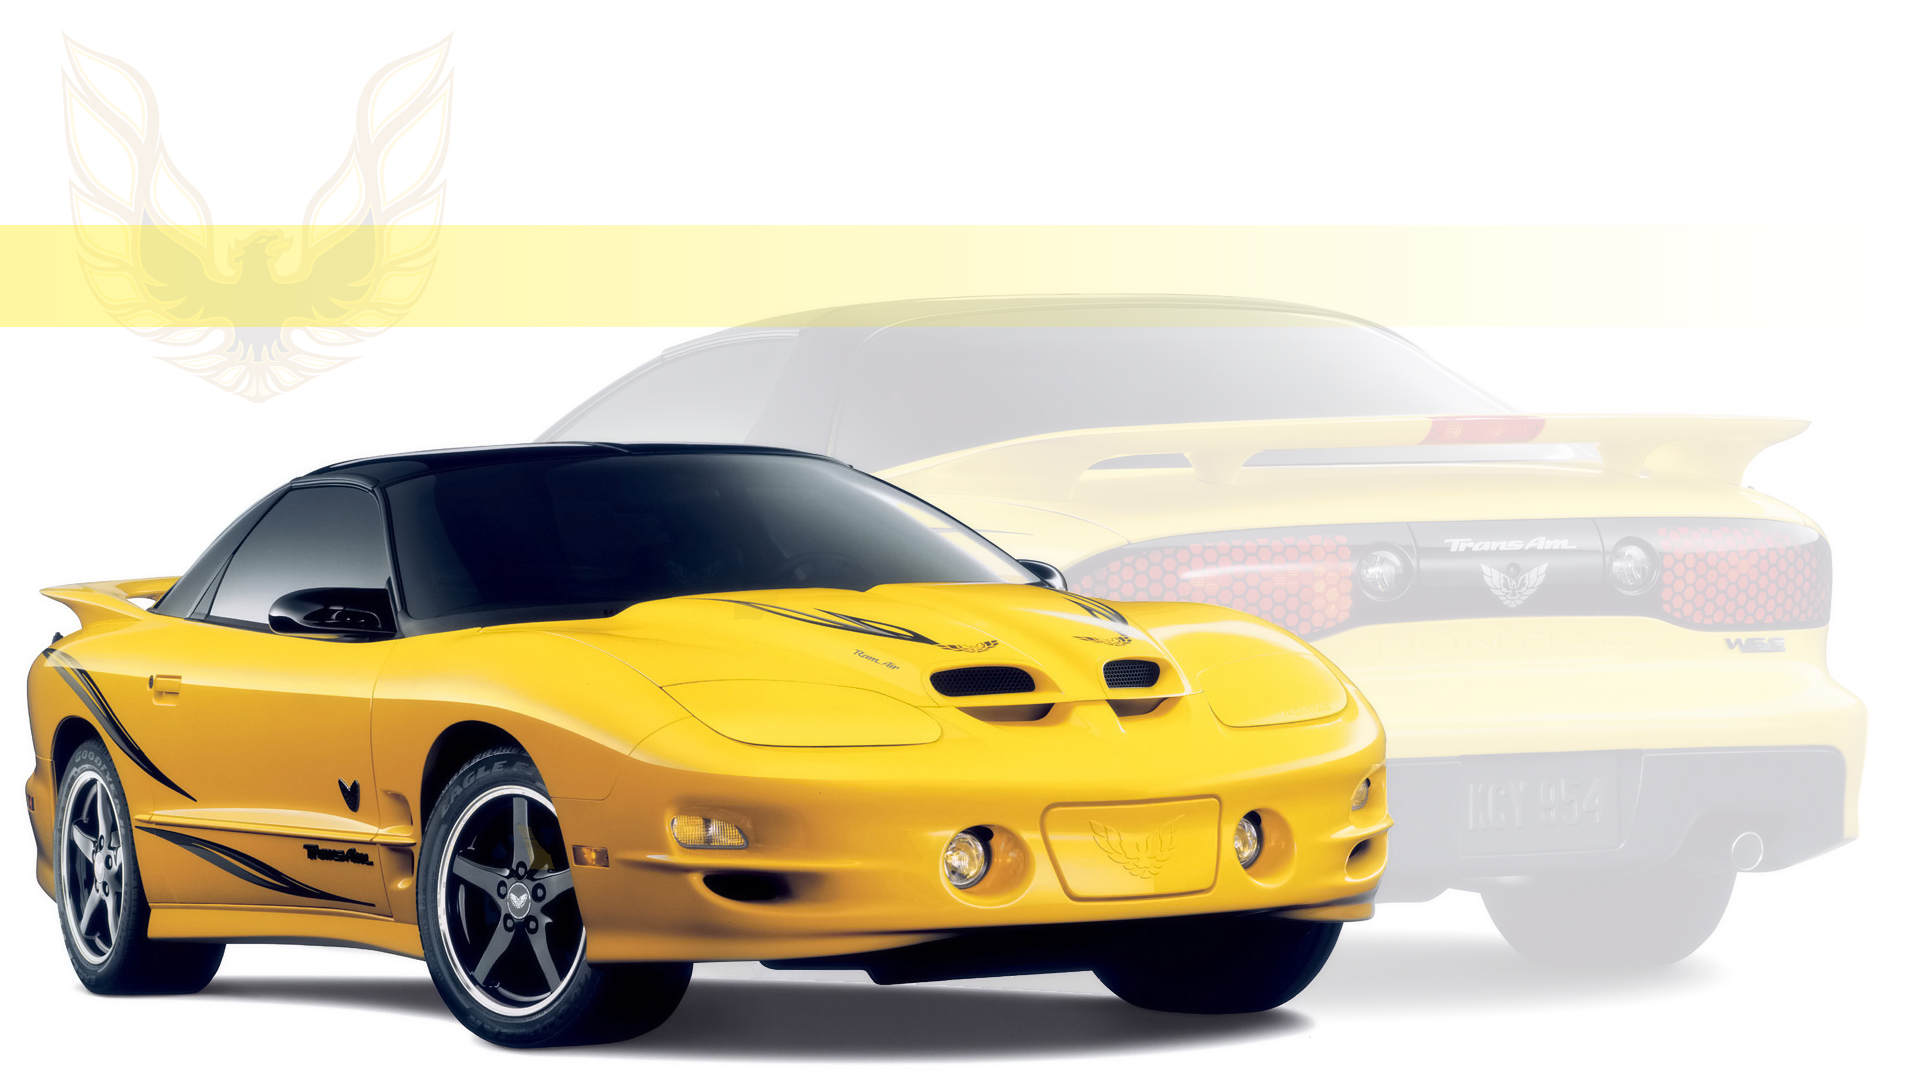 Animated Car For Desktop Background 13 HD Wallpapers | amagico.